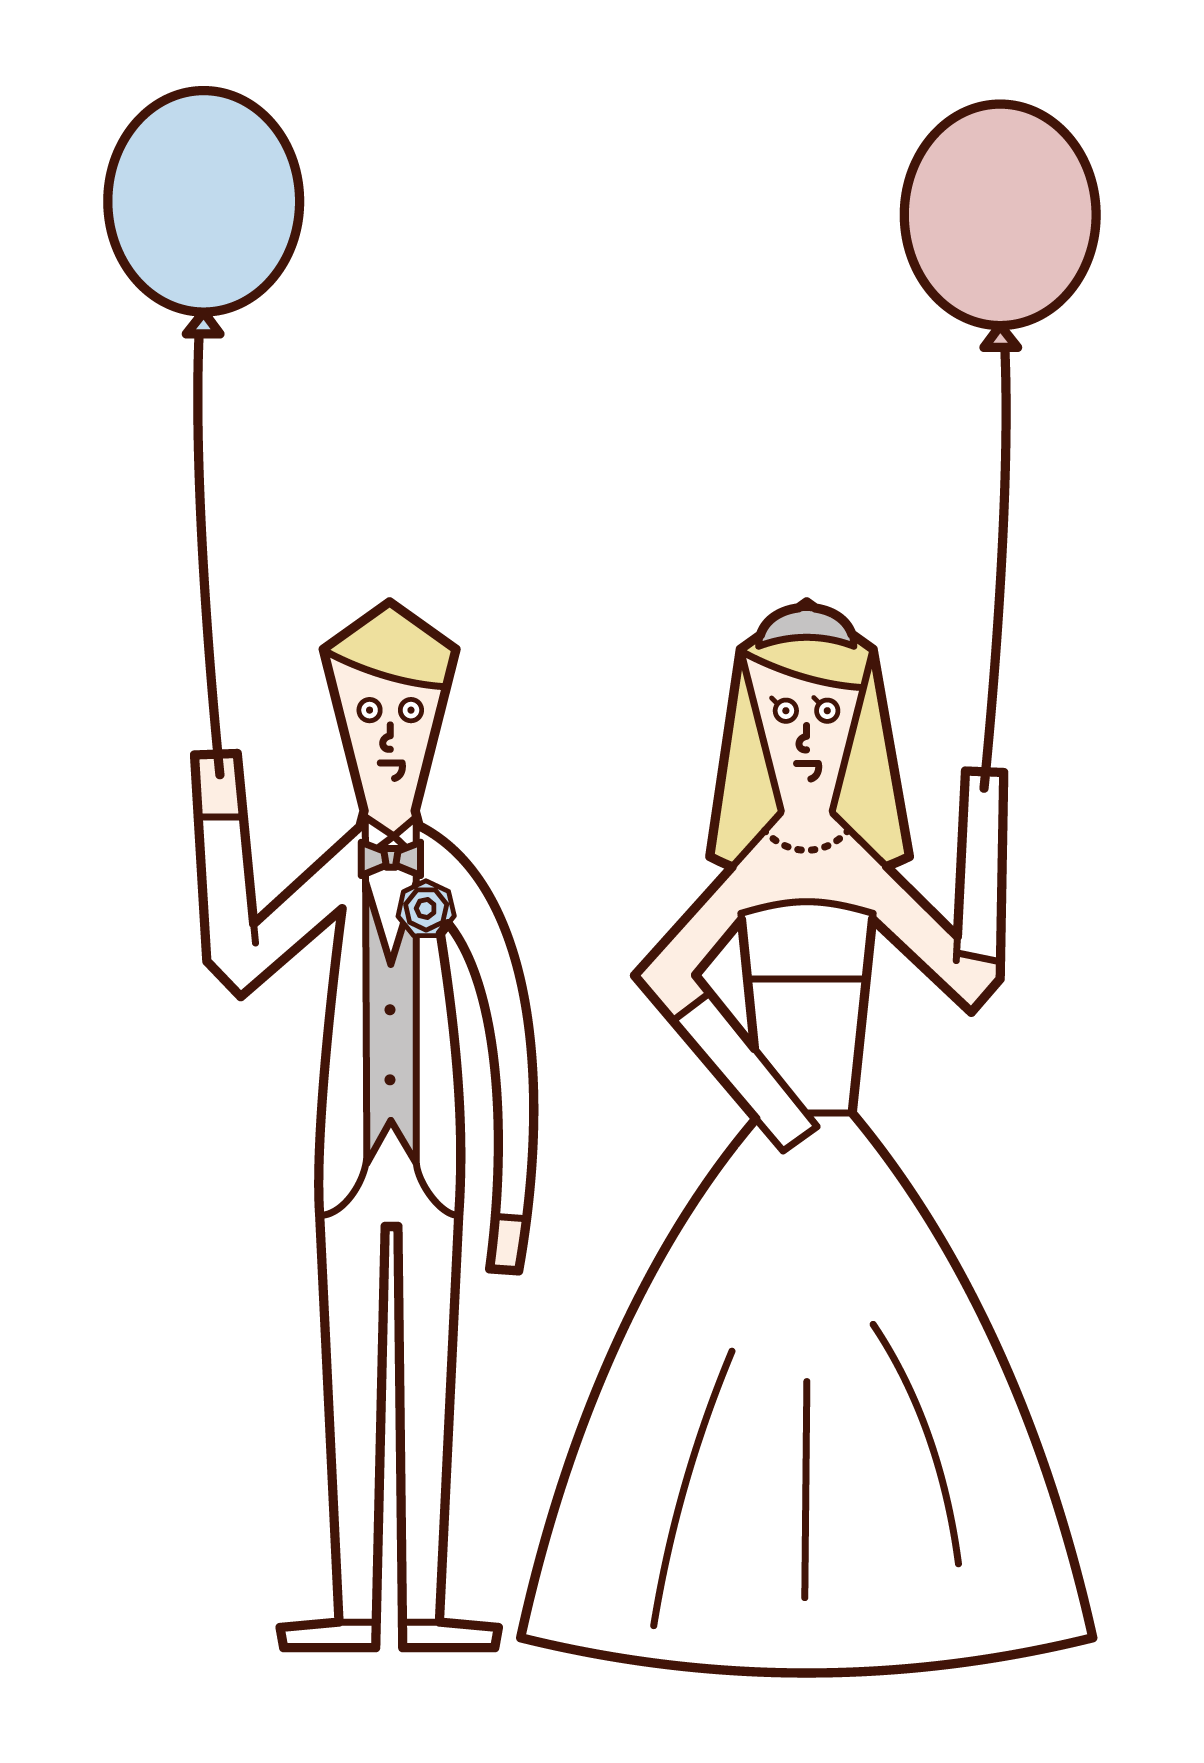 Illustration of bride and groom releasing balloons